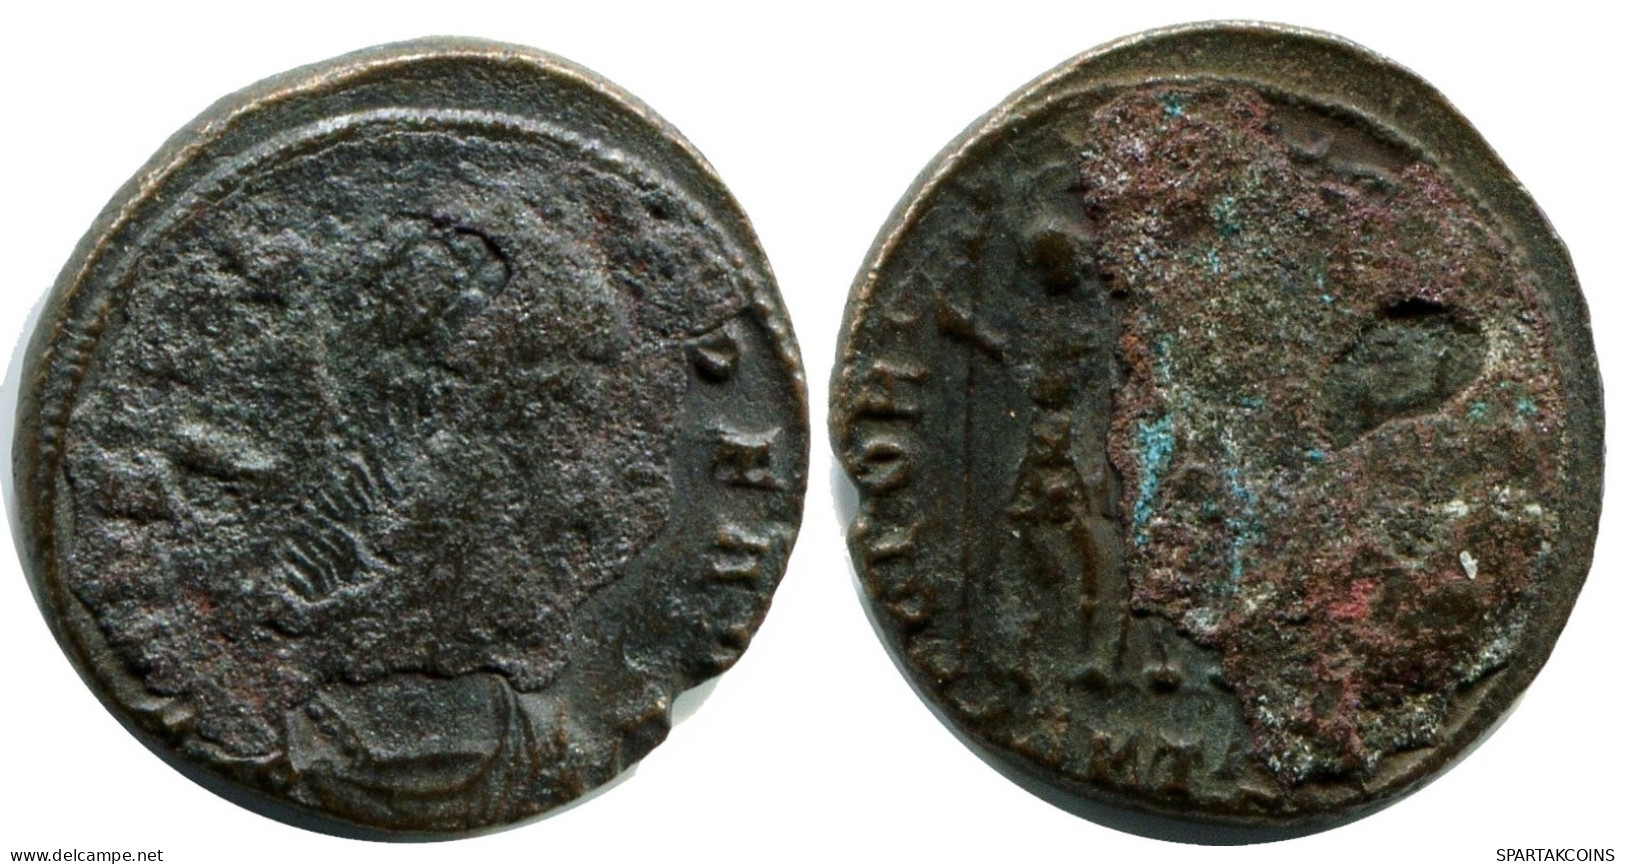 CONSTANS MINTED IN THESSALONICA FROM THE ROYAL ONTARIO MUSEUM #ANC11917.14.U.A - L'Empire Chrétien (307 à 363)